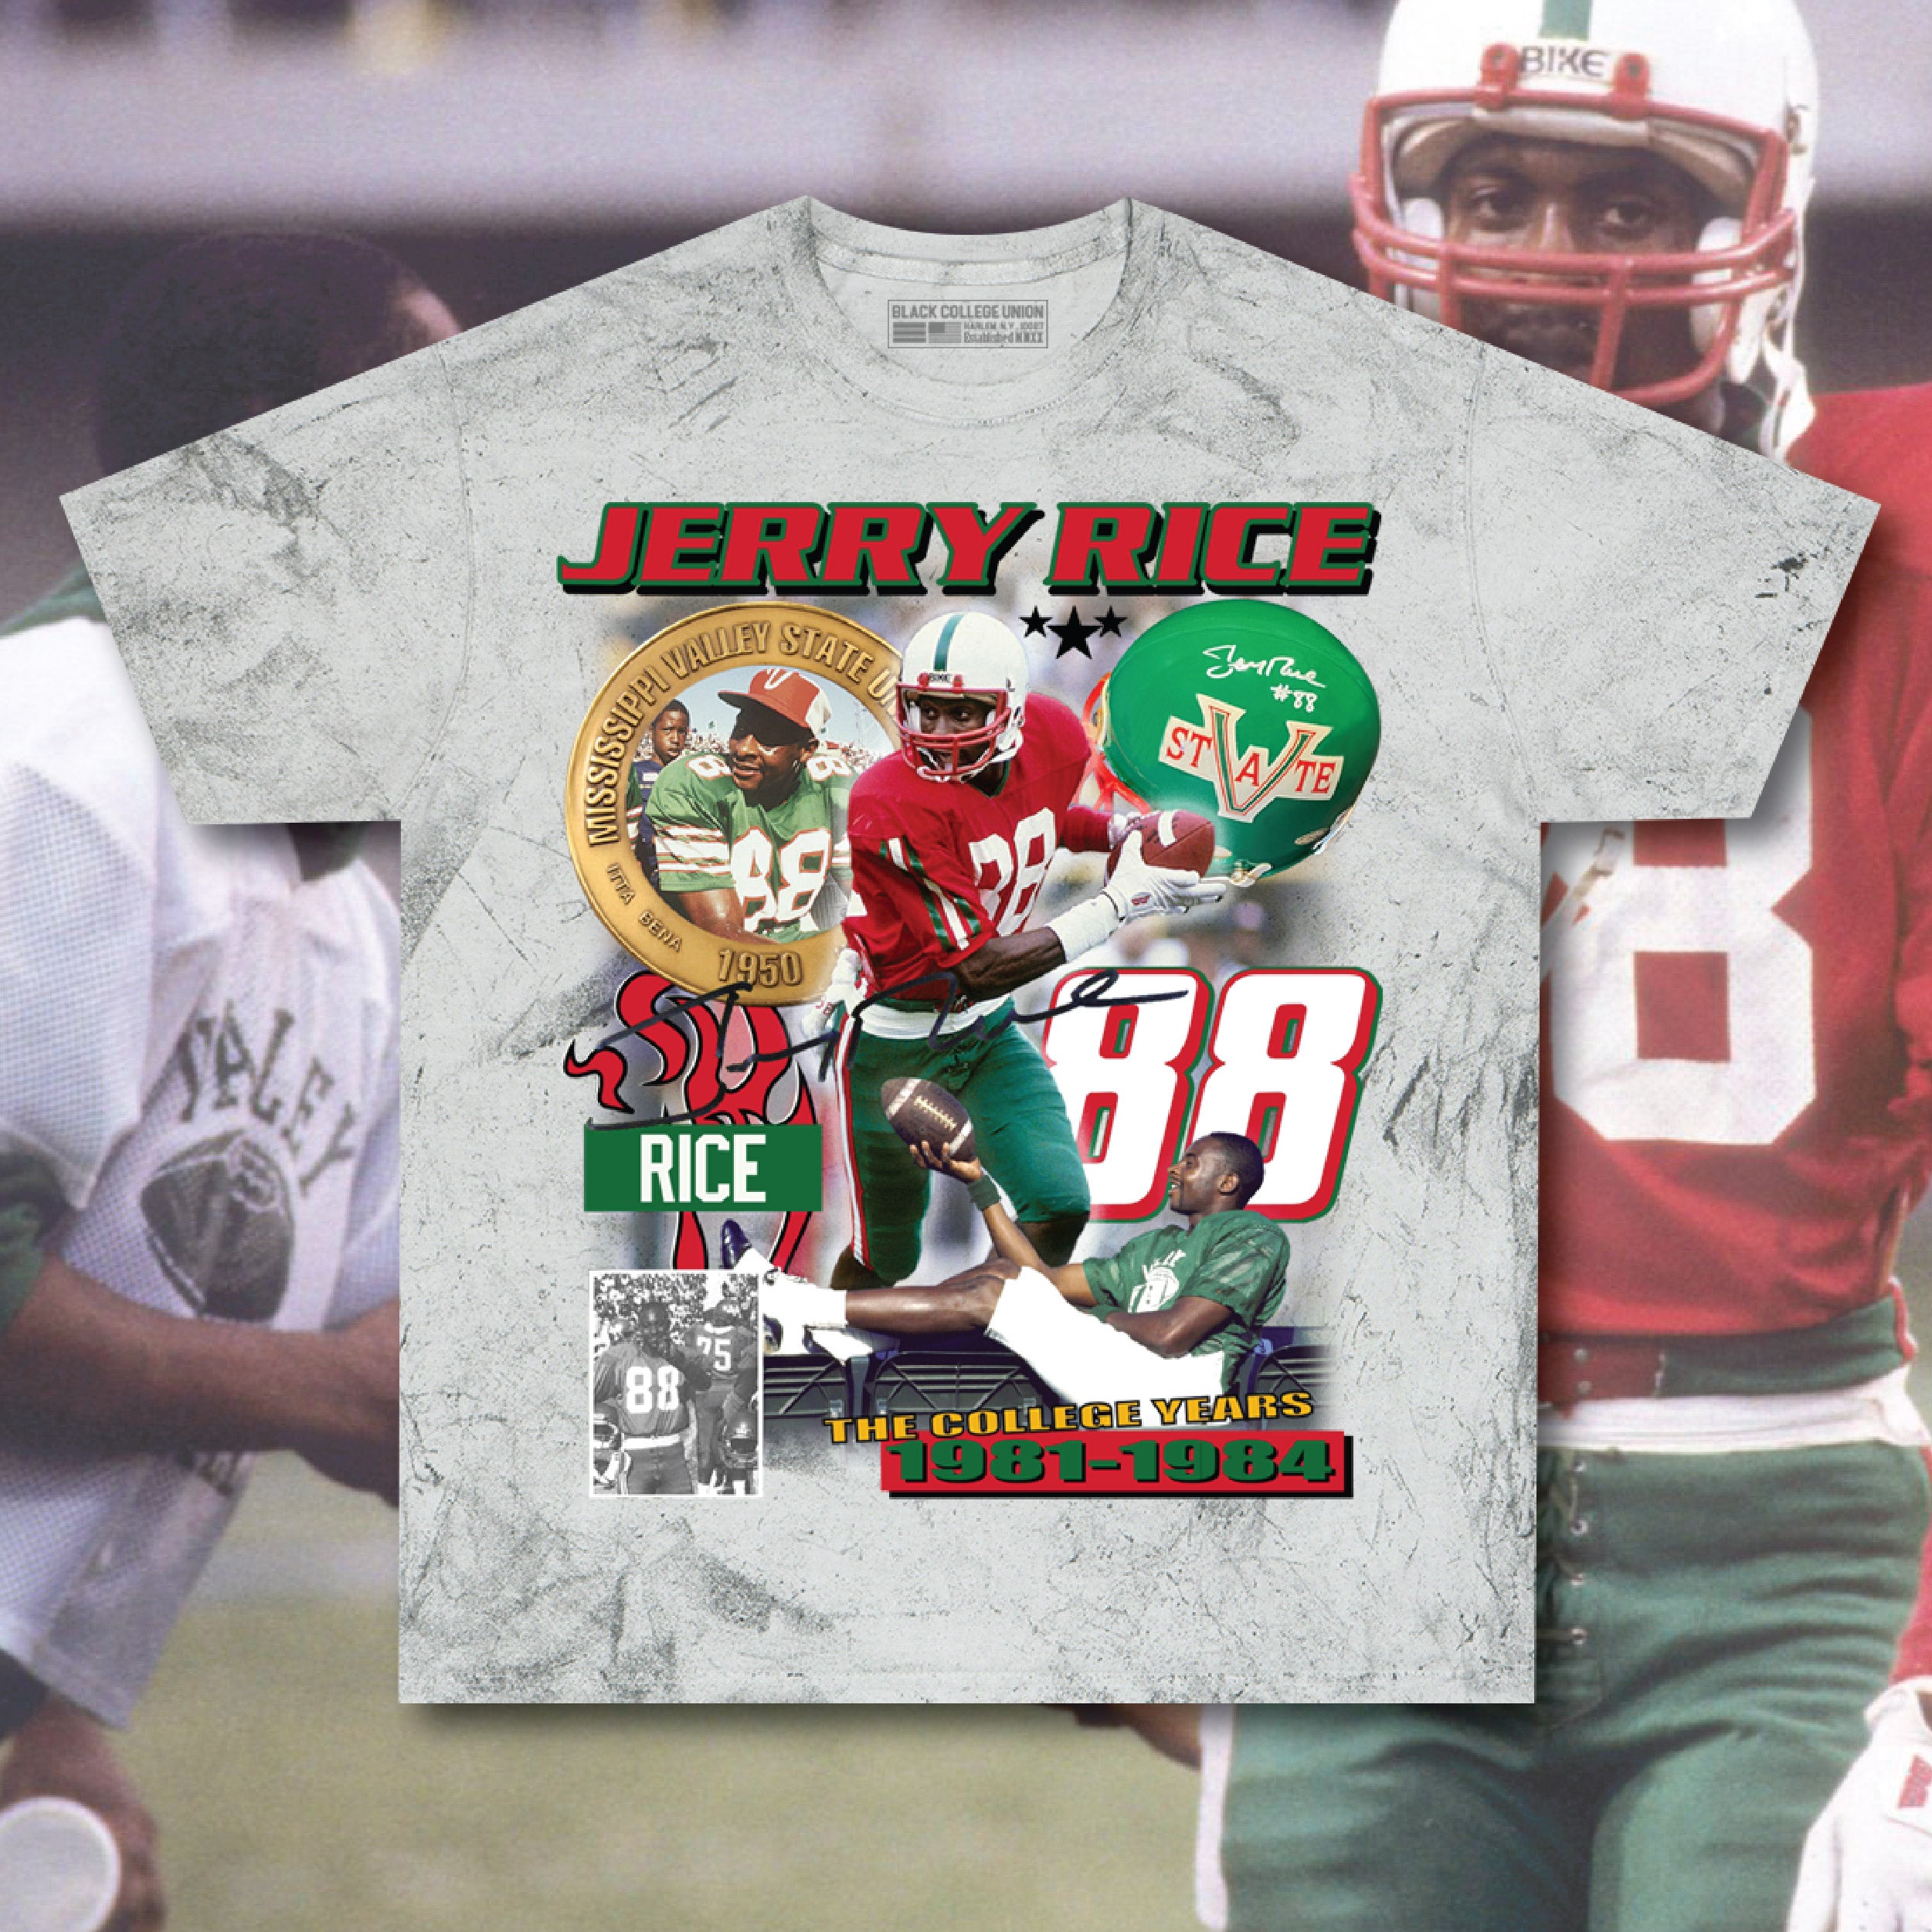 Jerry Rice "The College Years" Homage Tee - Mississippi Valley State [MVSU]